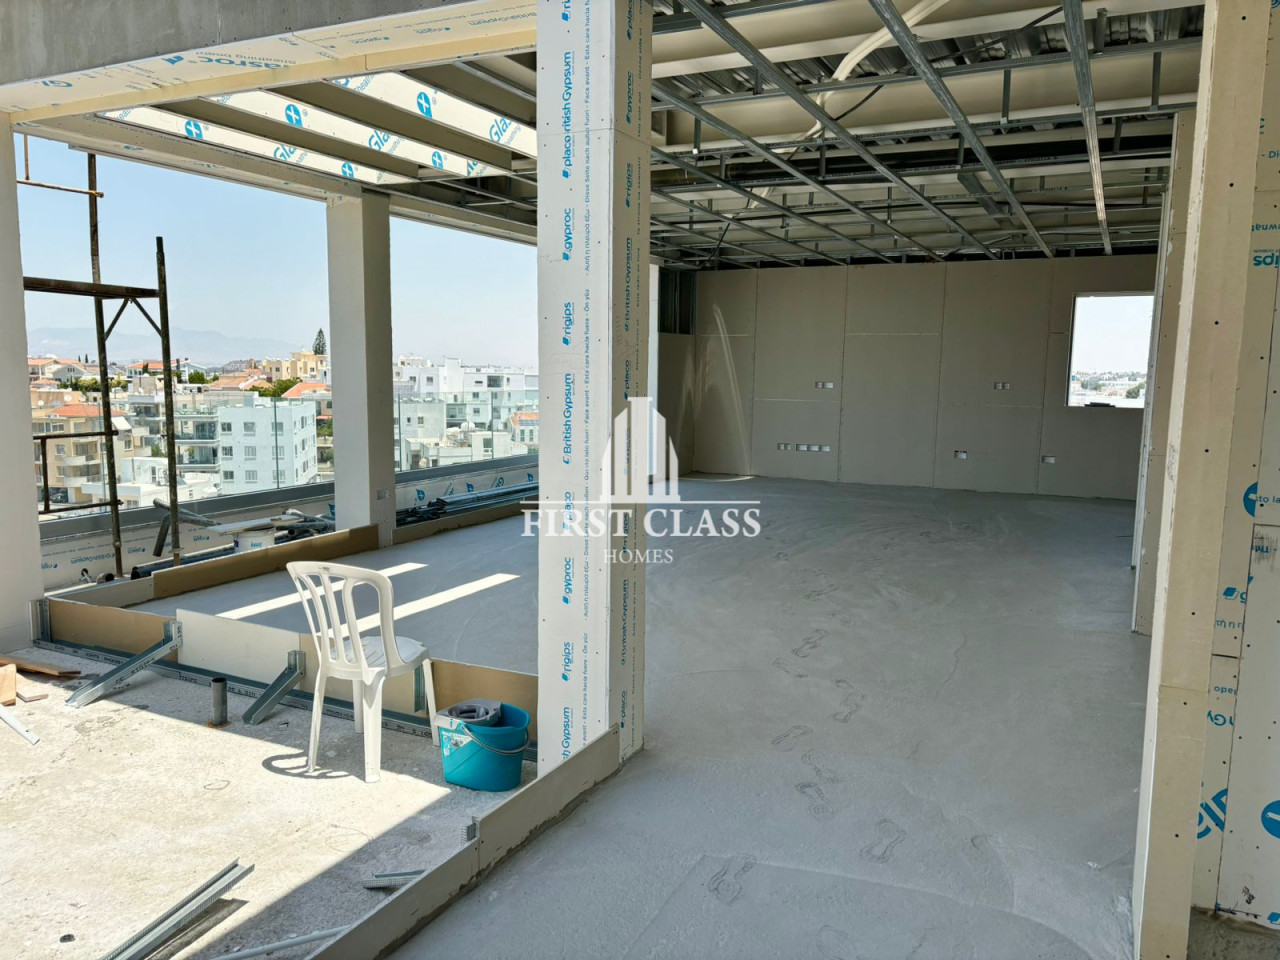 Property for Rent: Apartment (Penthouse) in Latsia, Nicosia for Rent | Key Realtor Cyprus